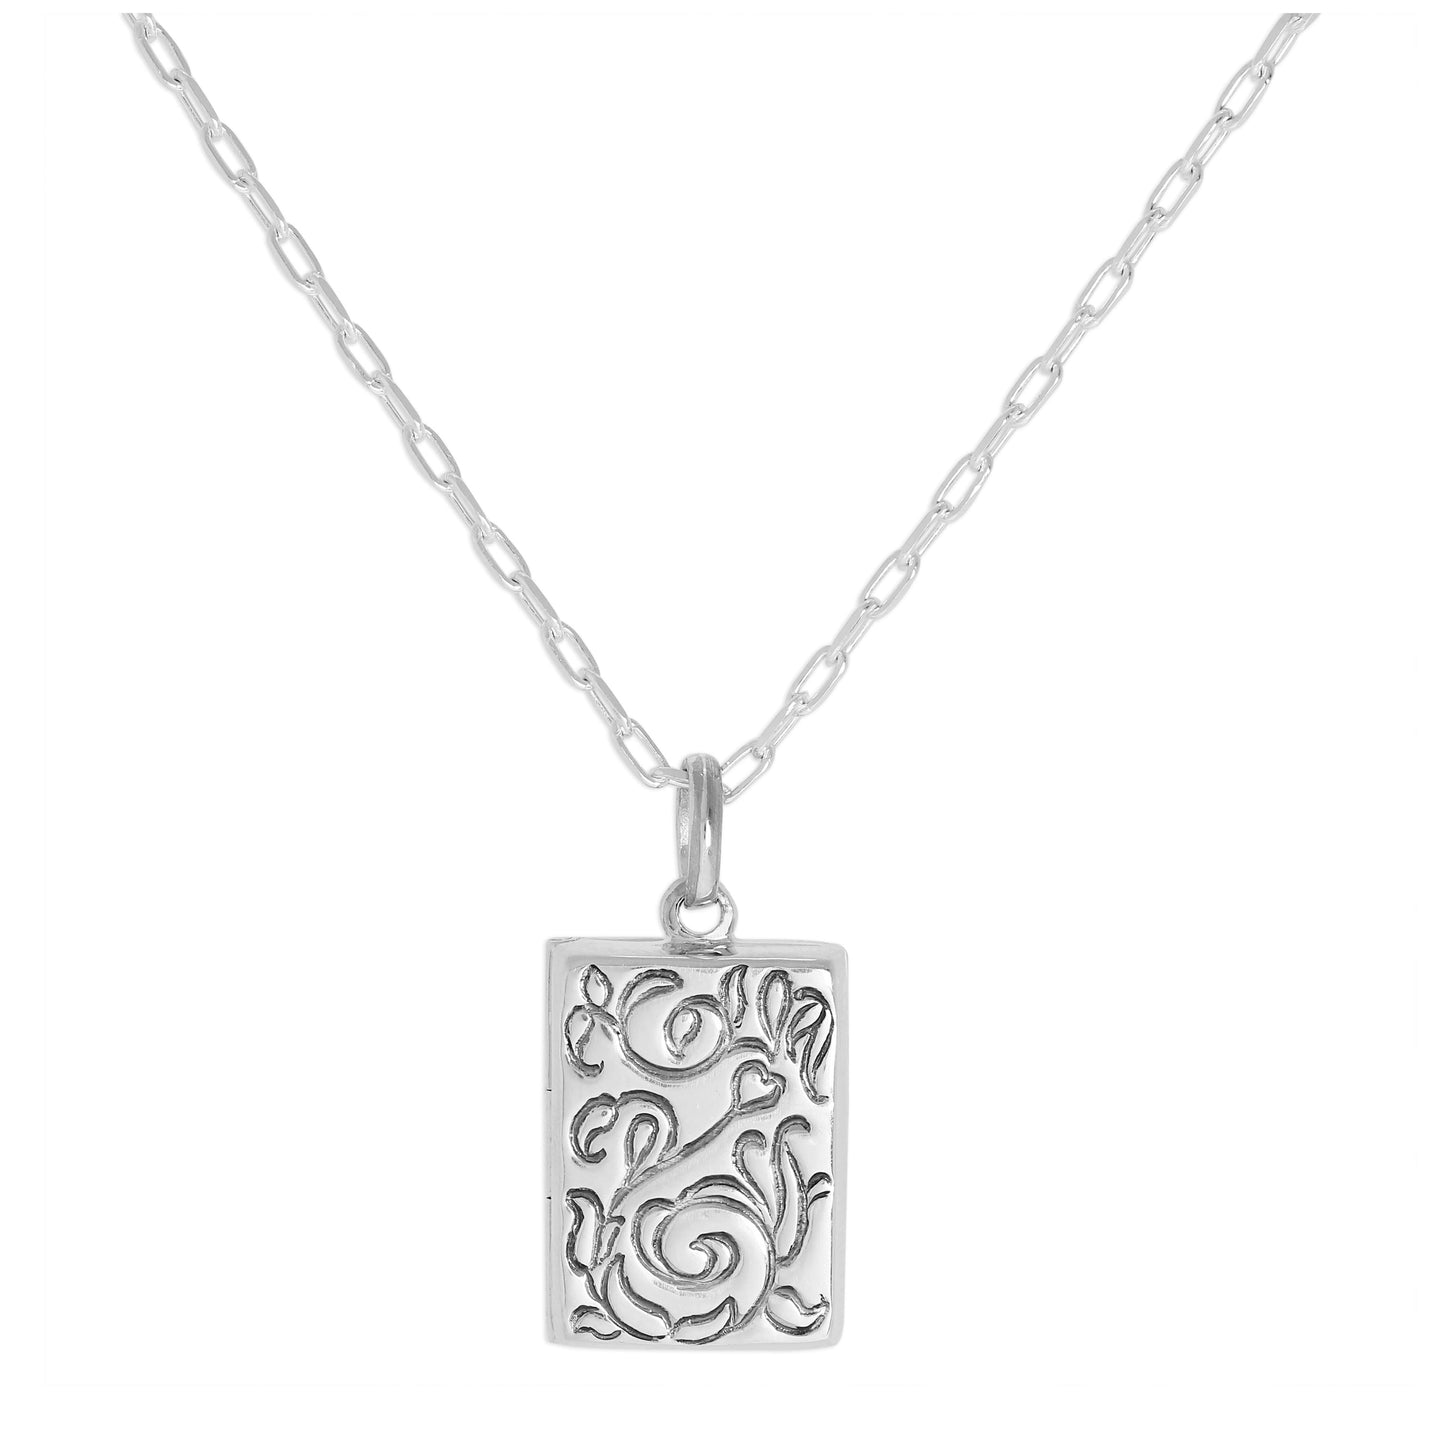 Sterling Silver Rectangular Locket with Floral Design on Chain 16 - 24 Inches